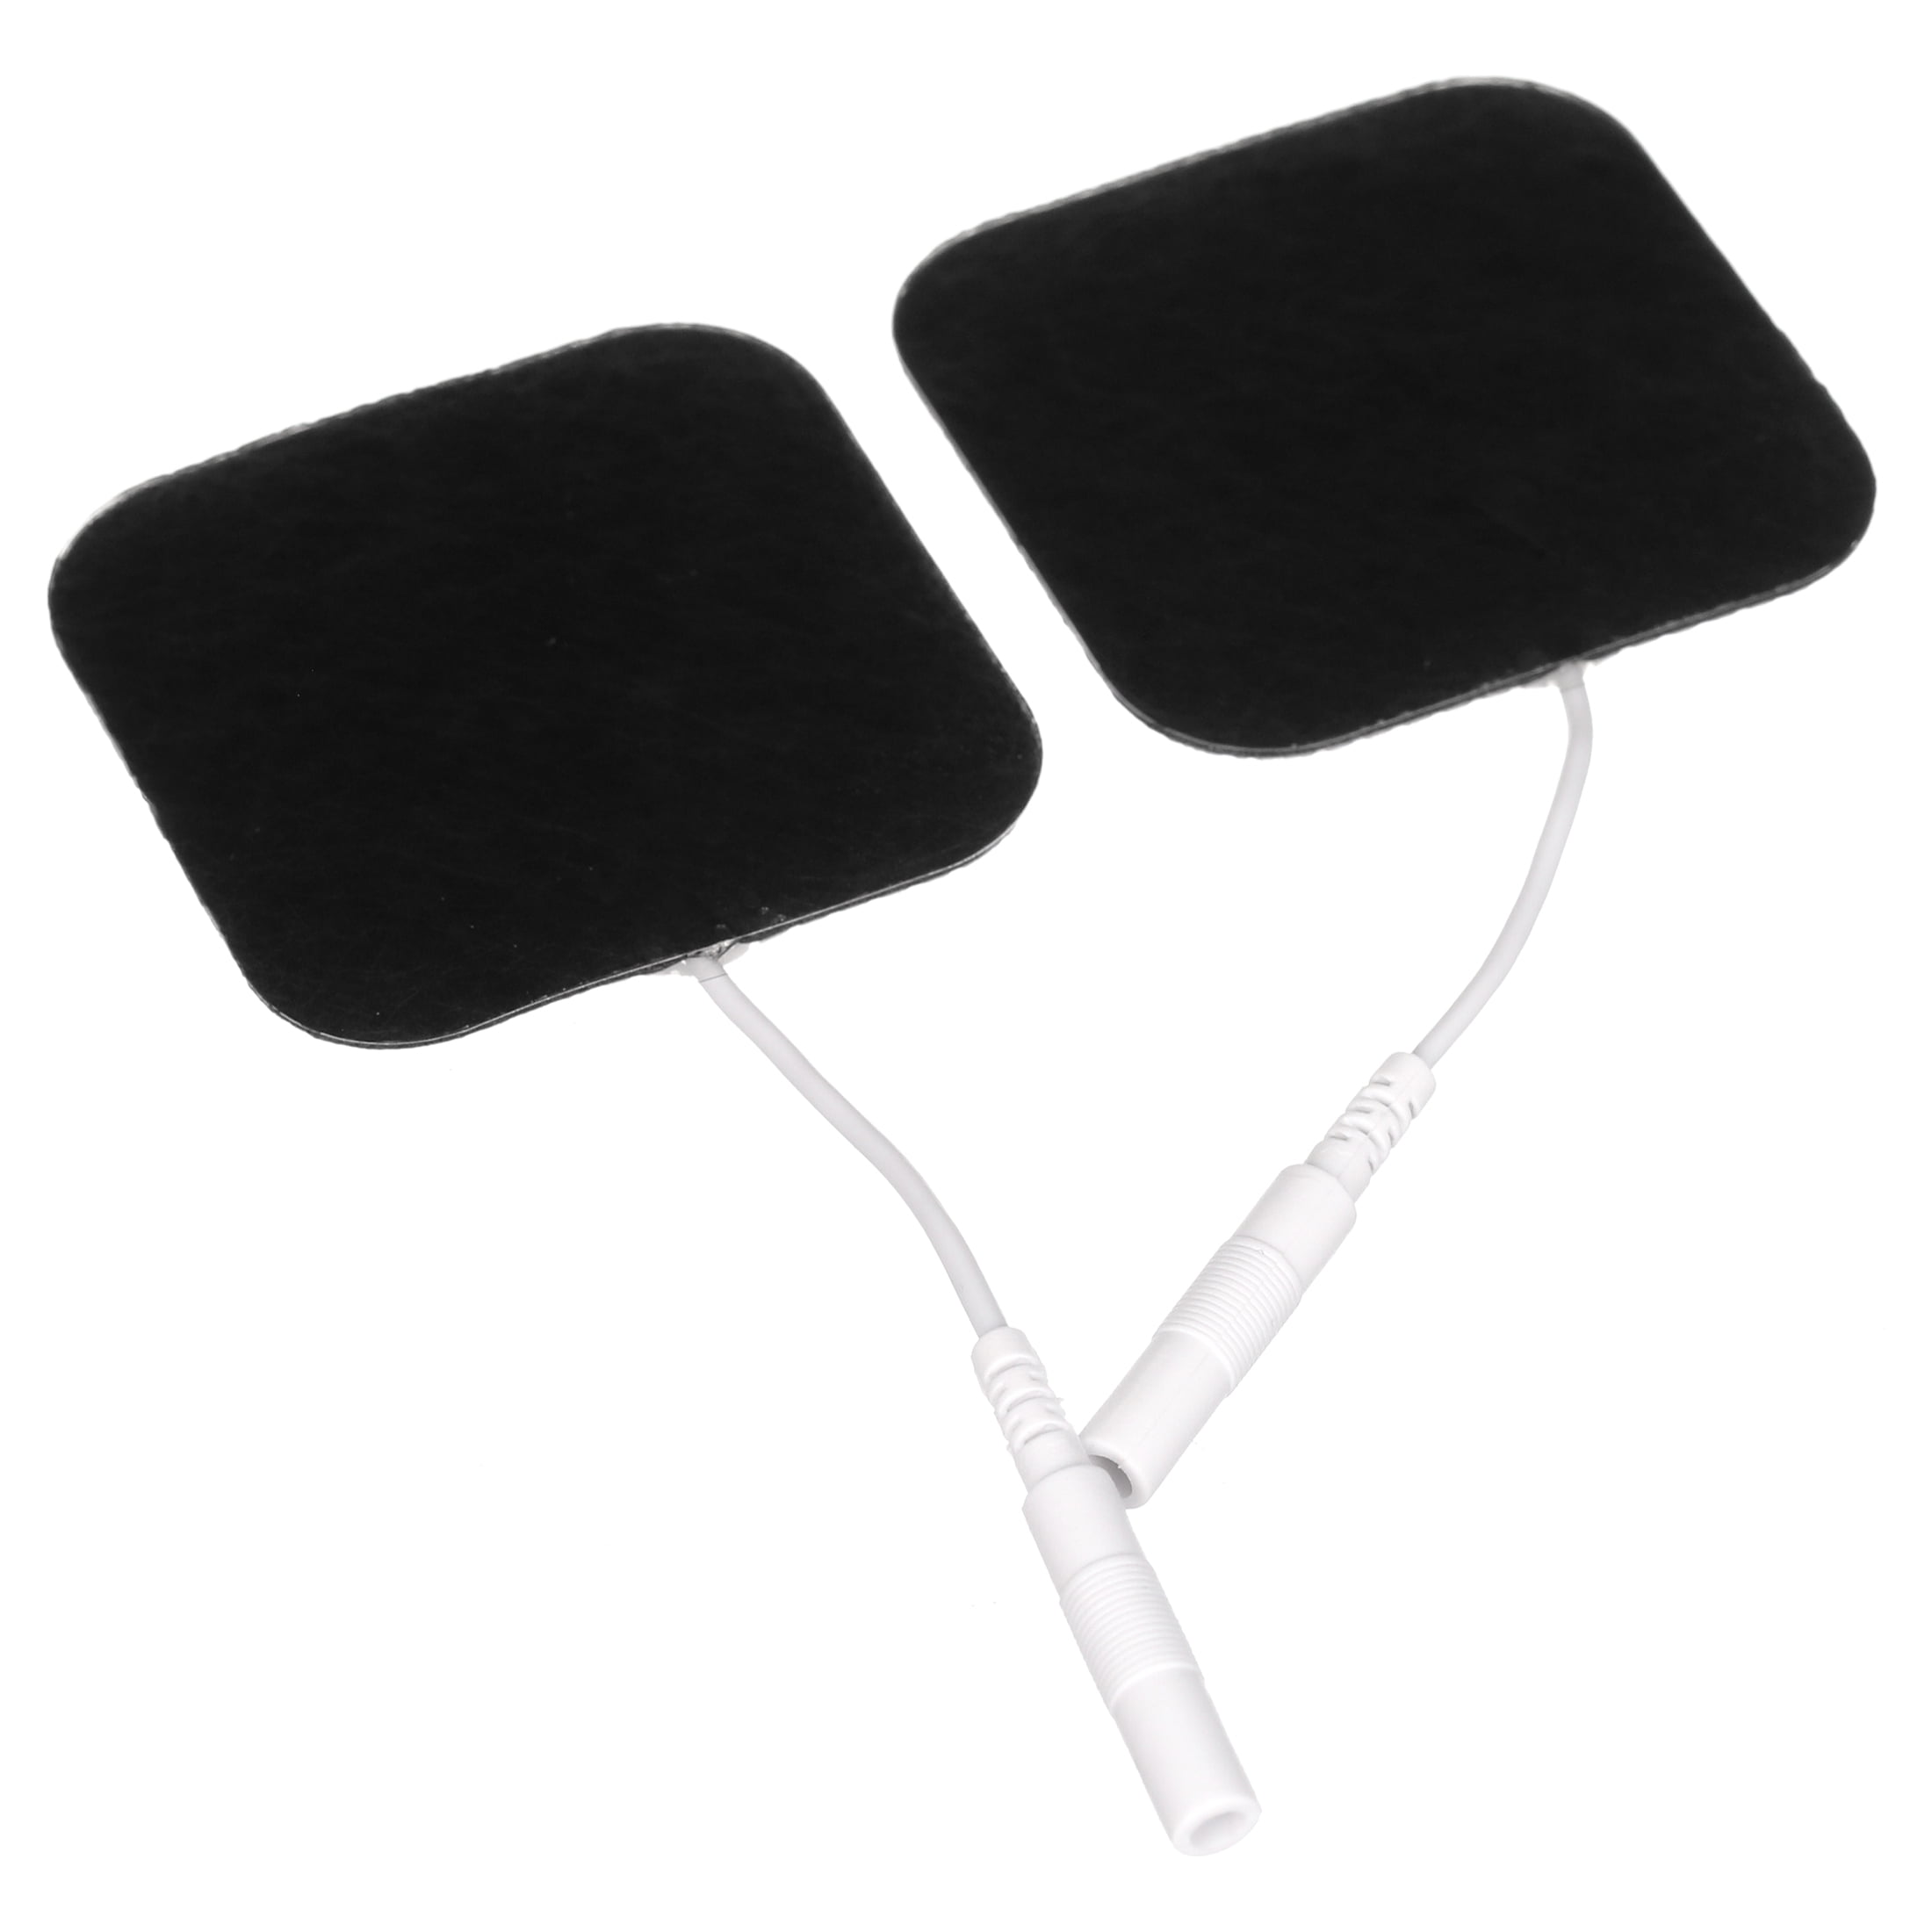 40 TENS Electrode Pads EMS Replacement Unit 7000 3000 2×2 Muscle